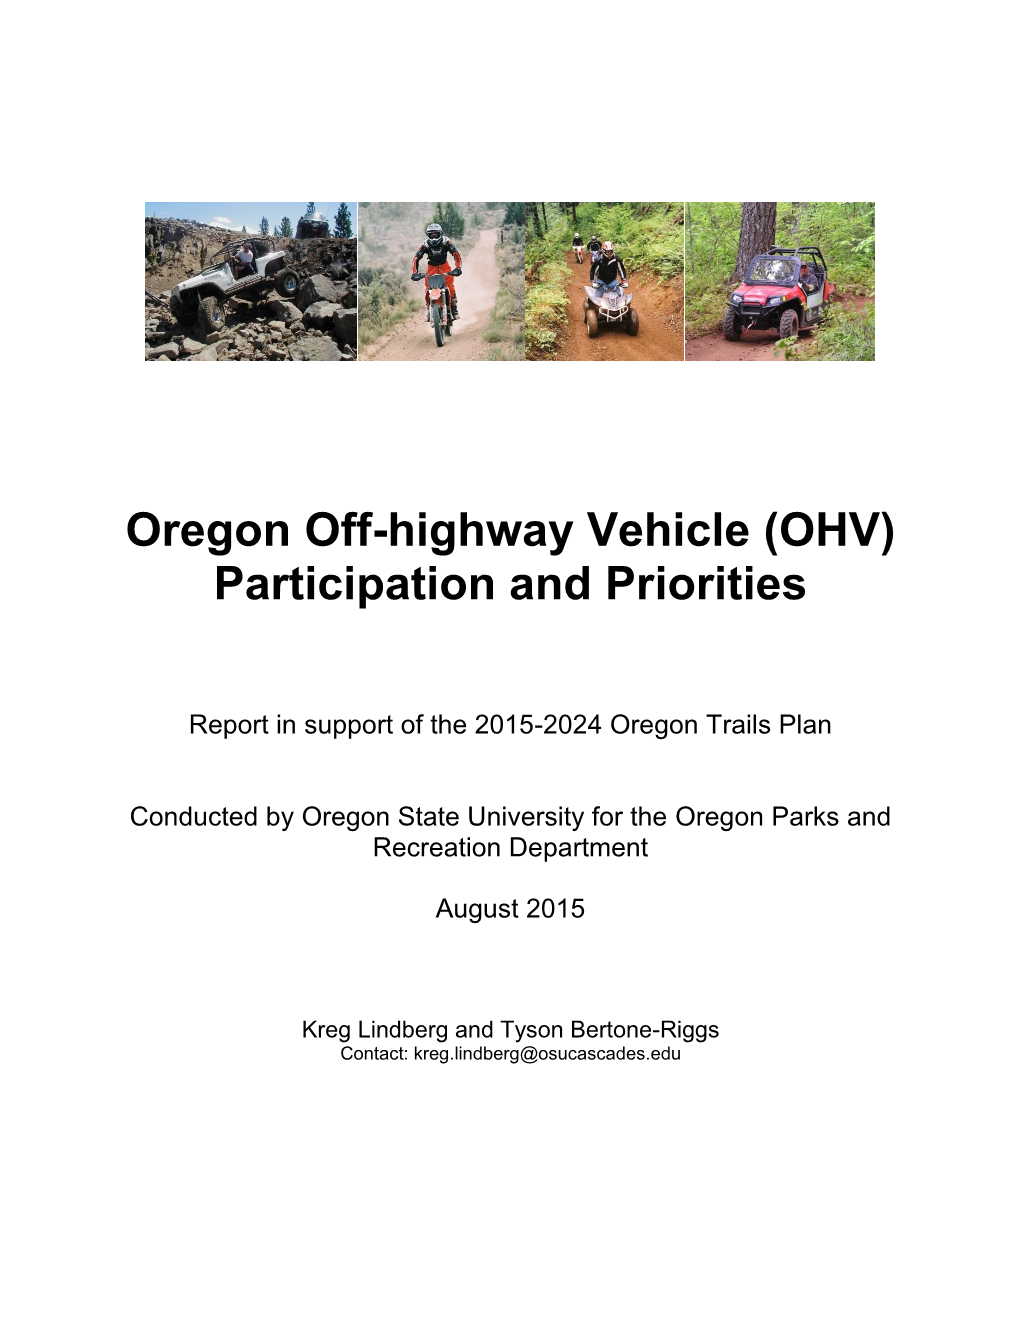 Oregon Off-Highway Vehicle (OHV) Participation and Priorities